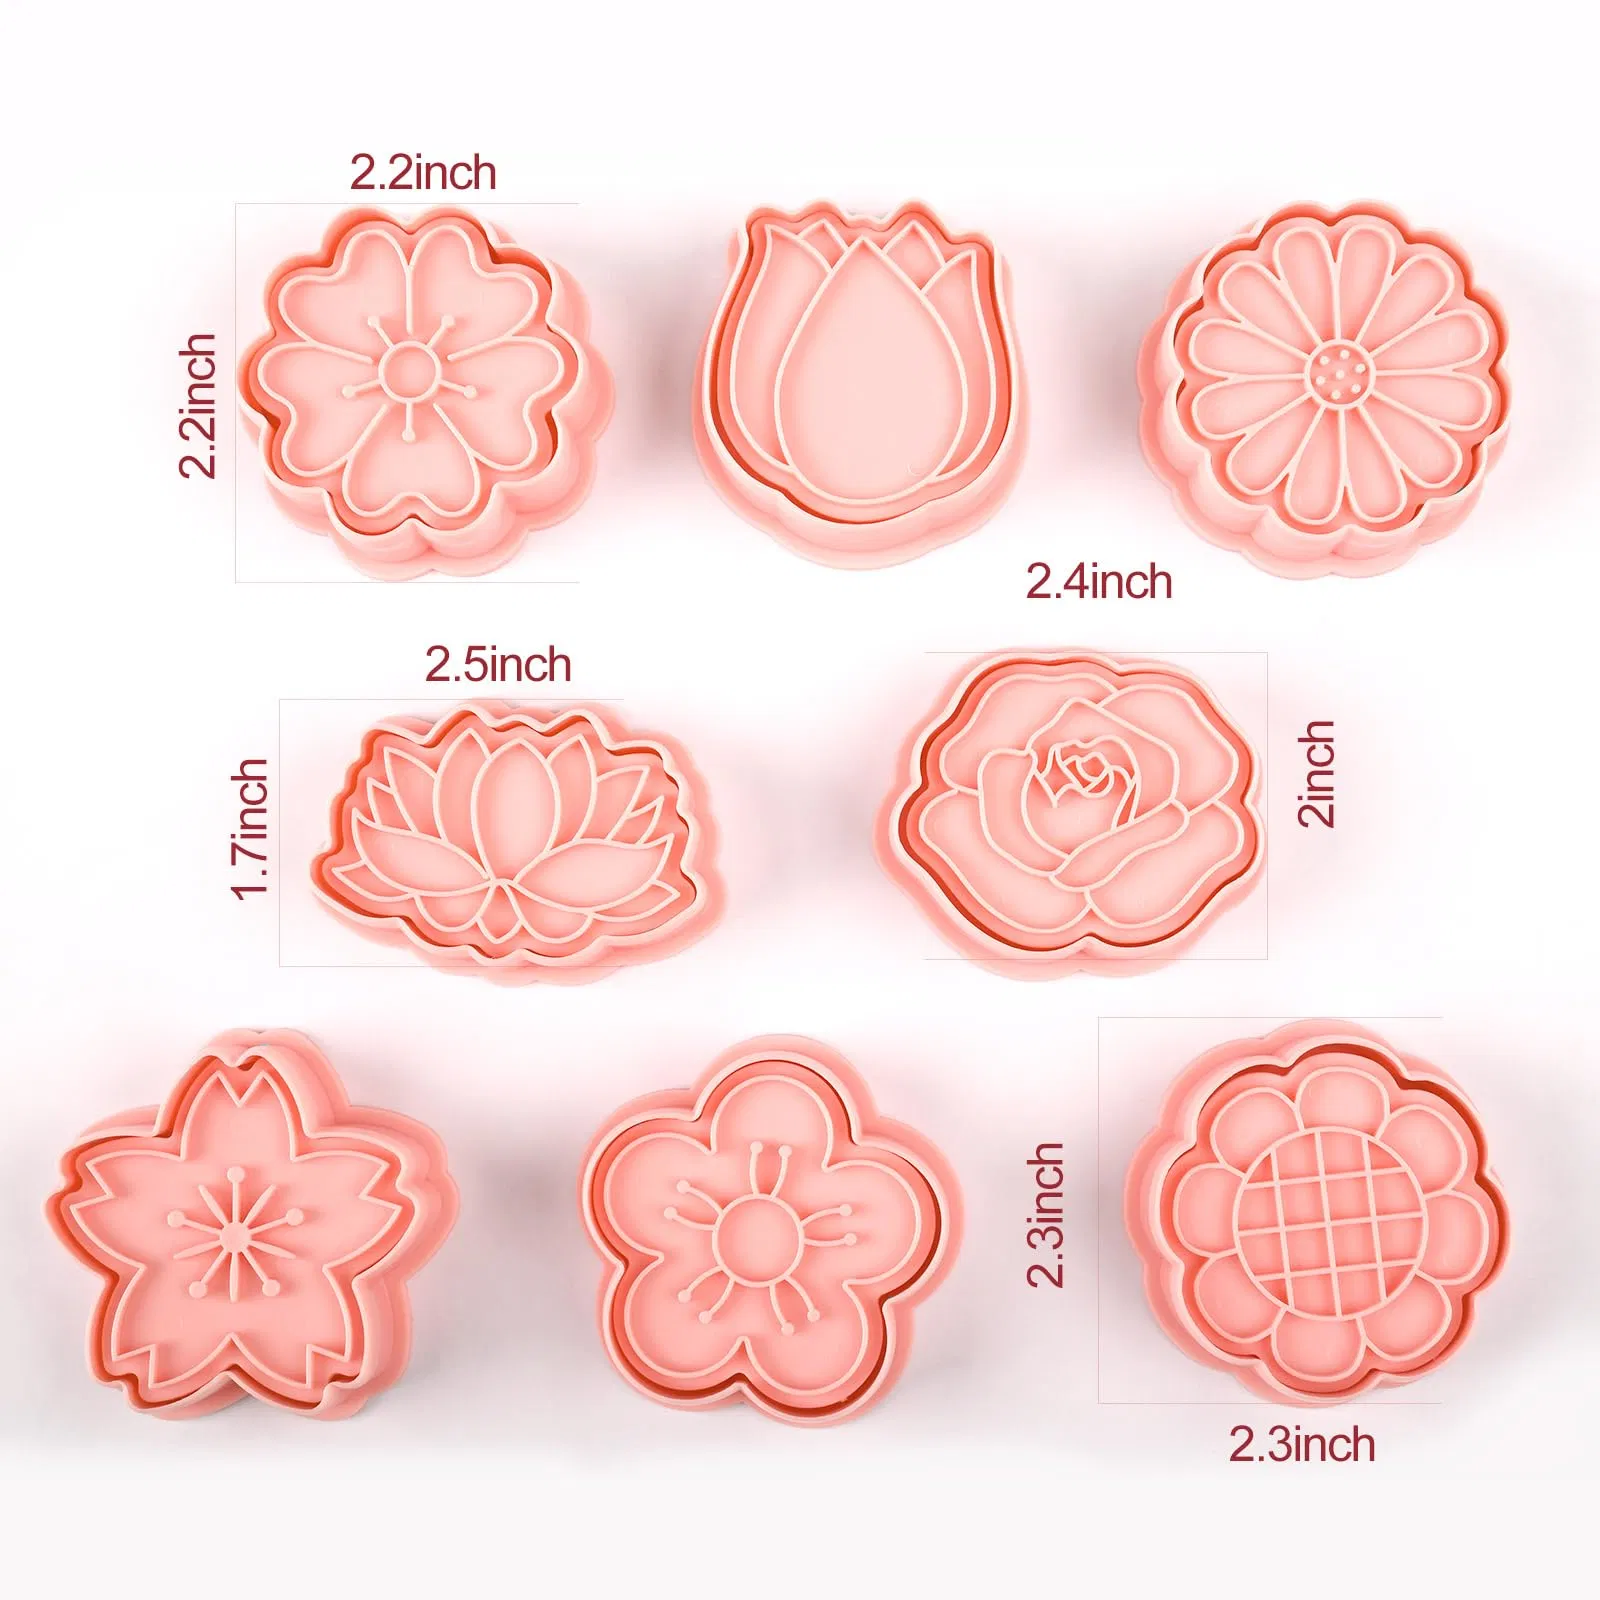 Flower Cake 3D Cookie Cutter with Plunger Stamps Mold for Home Kitchen